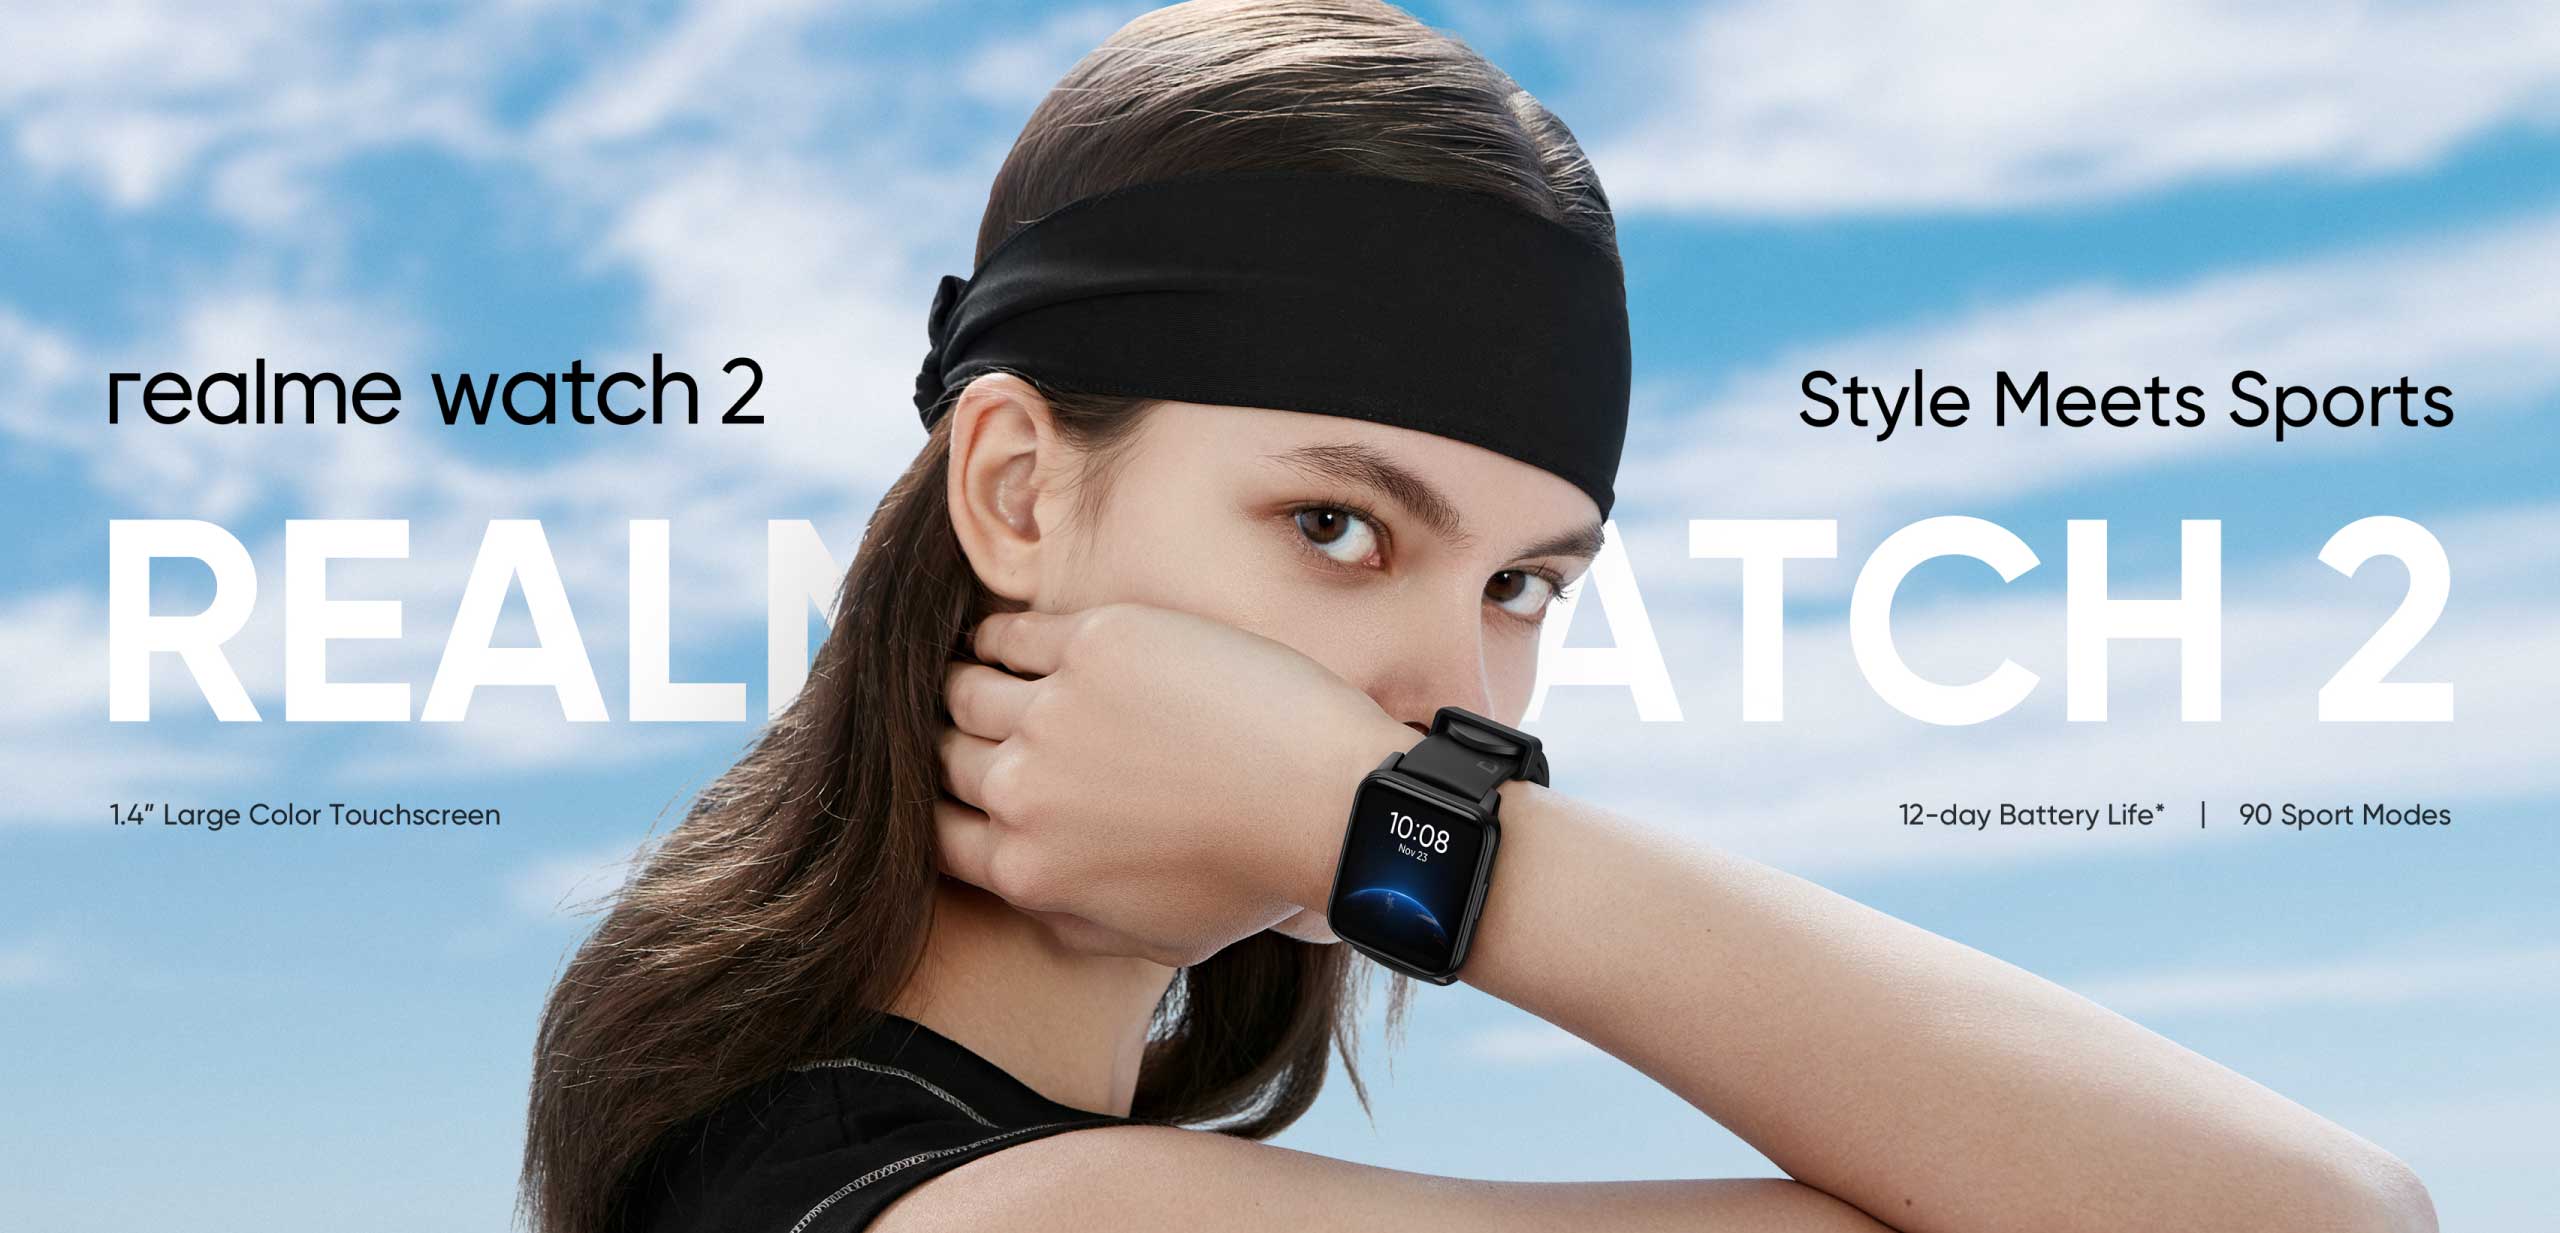 Realme Watch 2 entered the global market: smartwatch with SpO2 sensor, IP68 protection and battery life up to 12 days for 55 euros